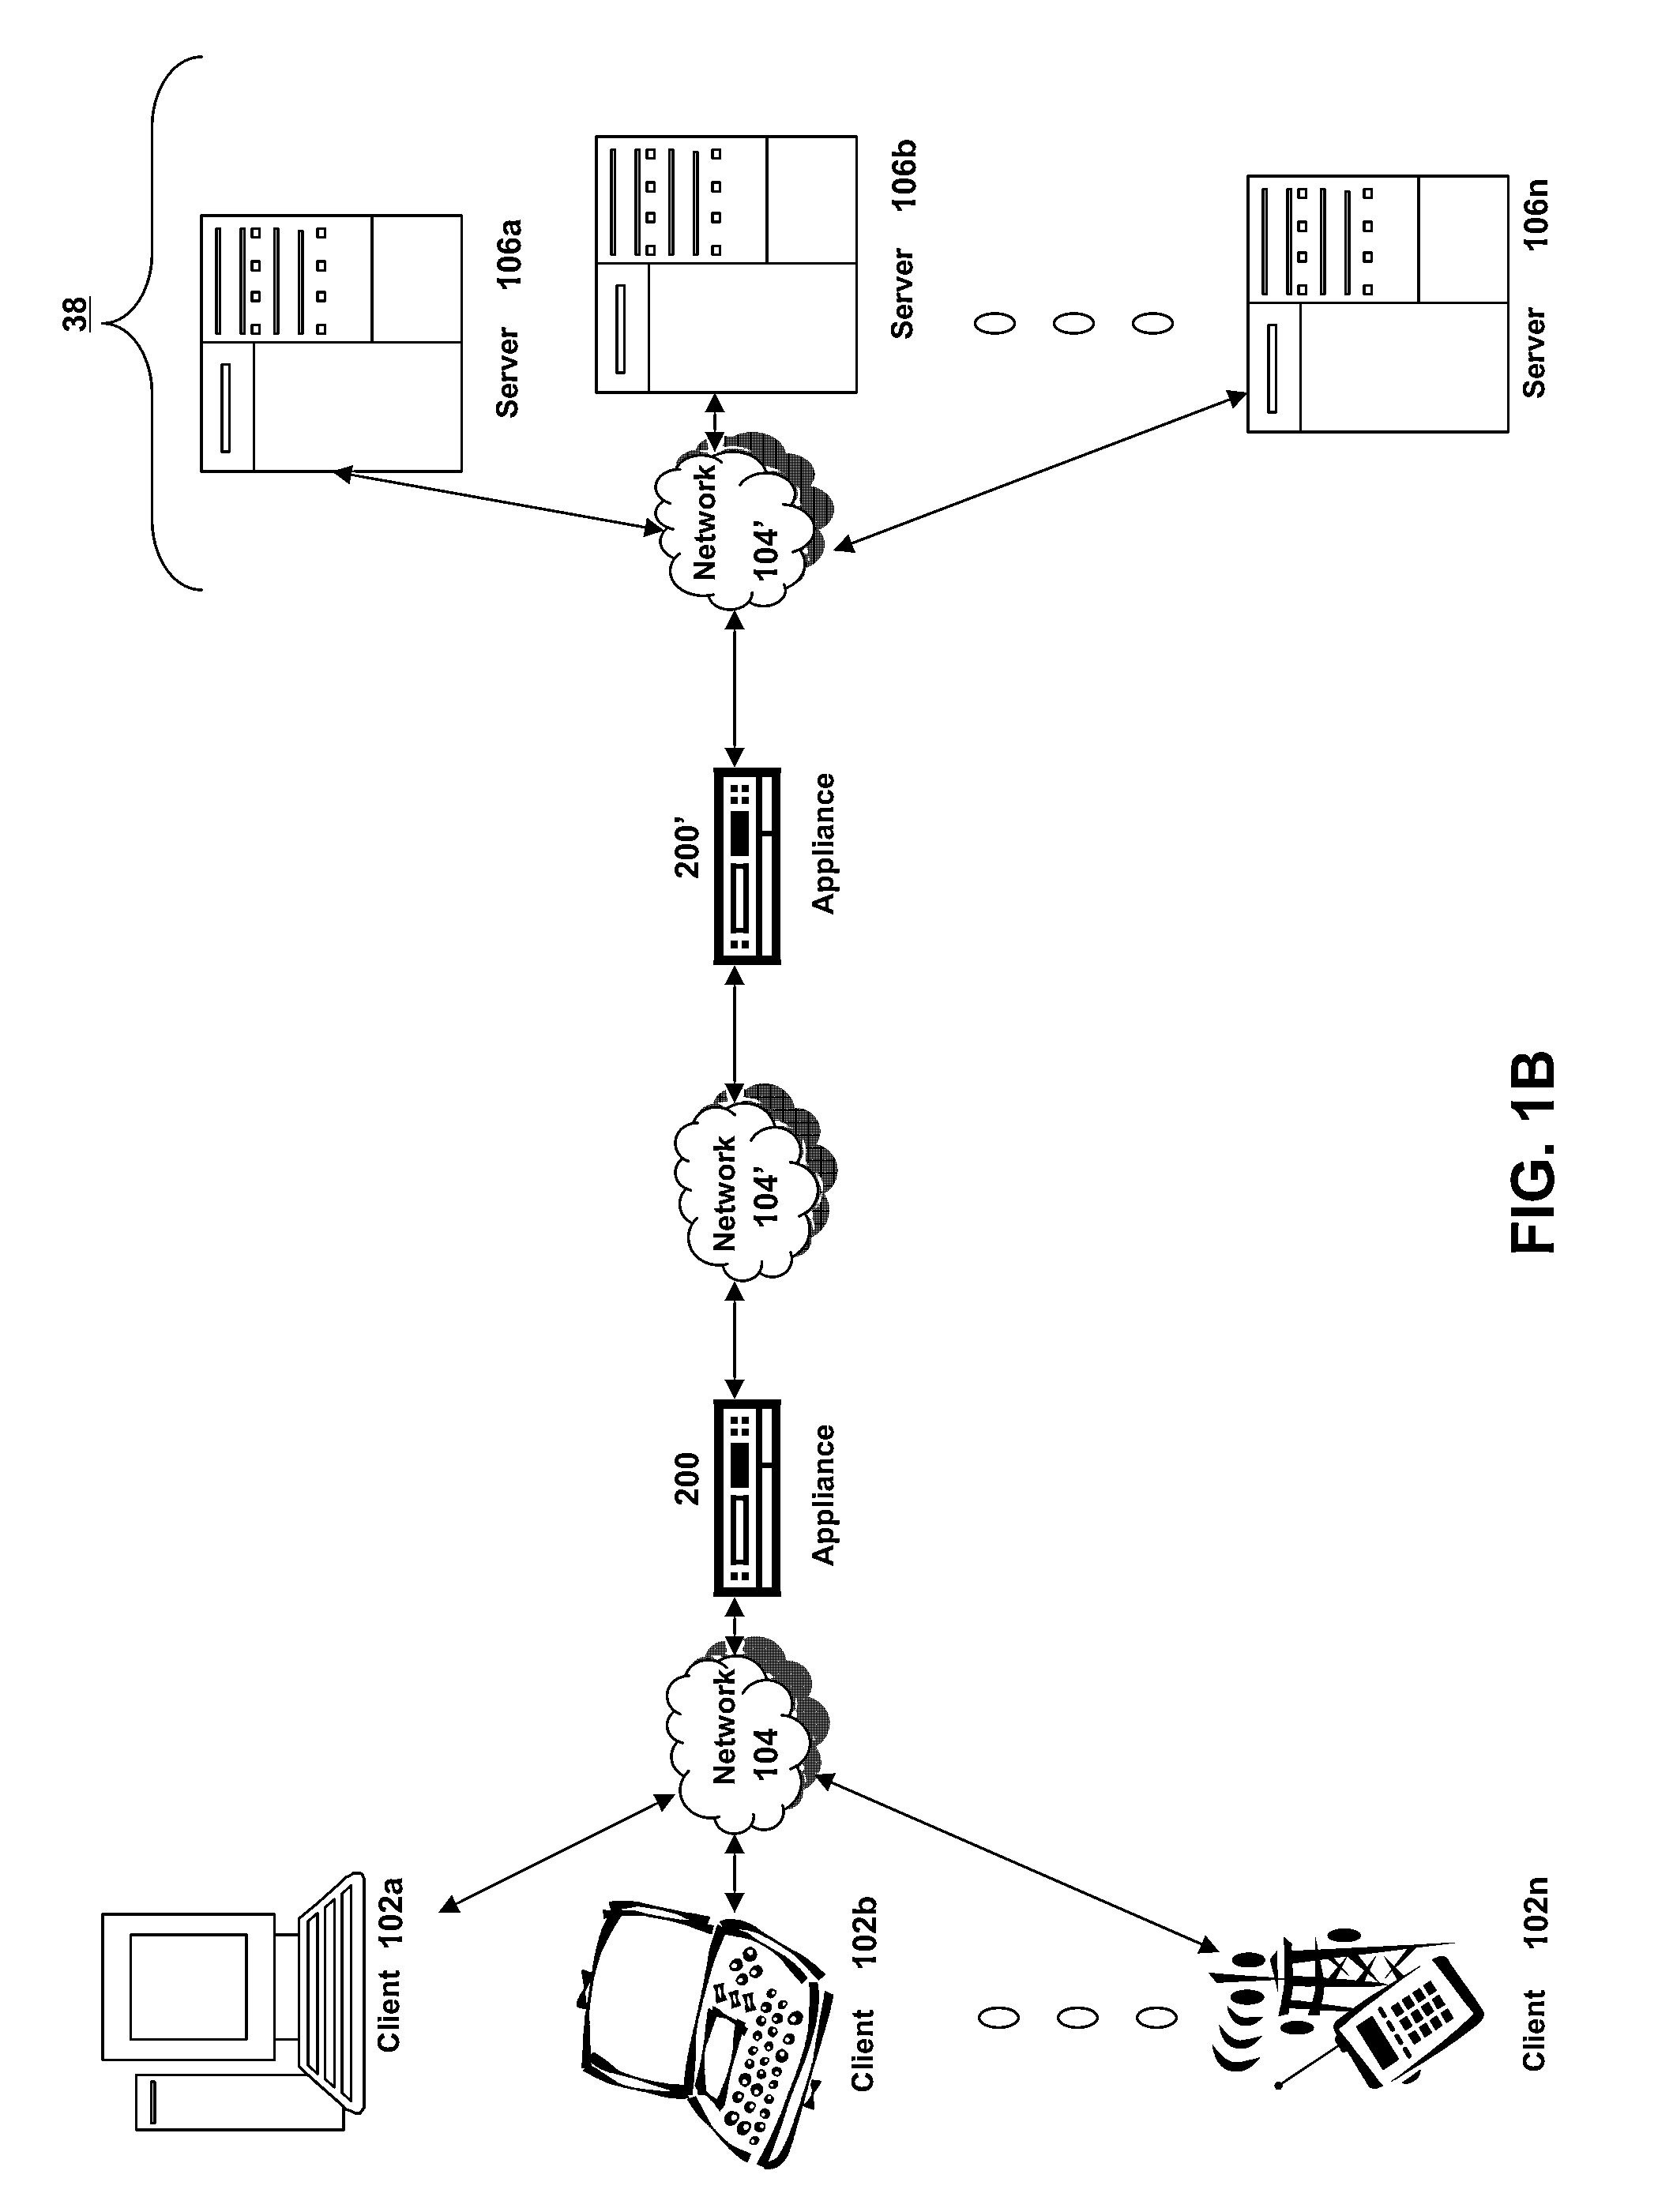 Systems and methods for synchronizing MSS and PMTU in Ncore and cluster systems